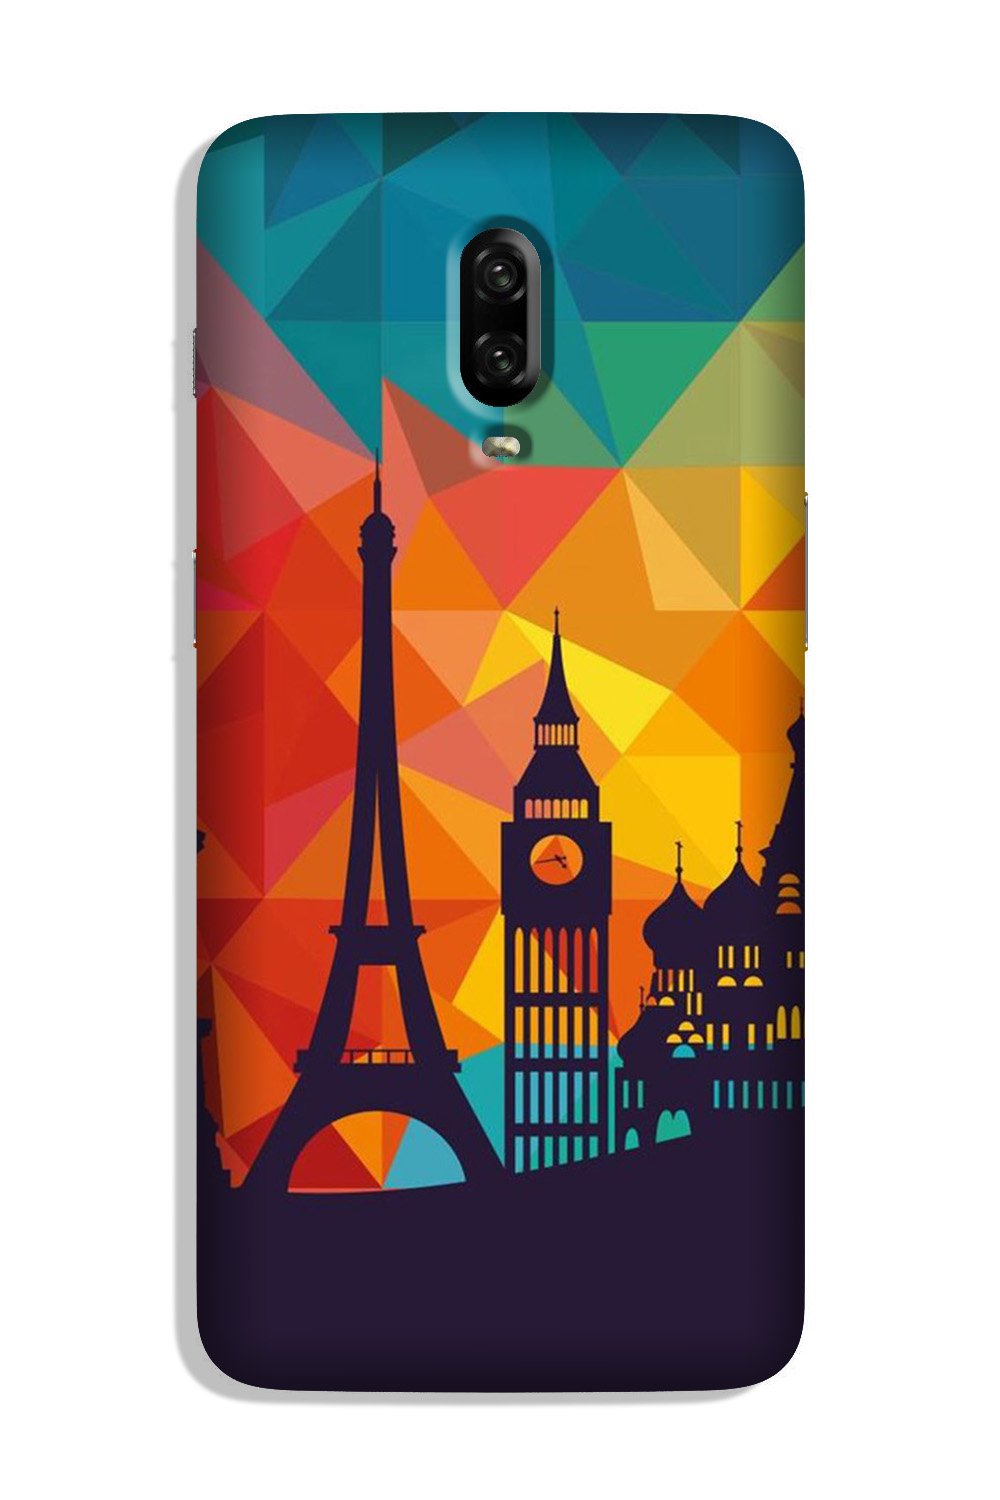 Eiffel Tower2 Case for OnePlus 6T